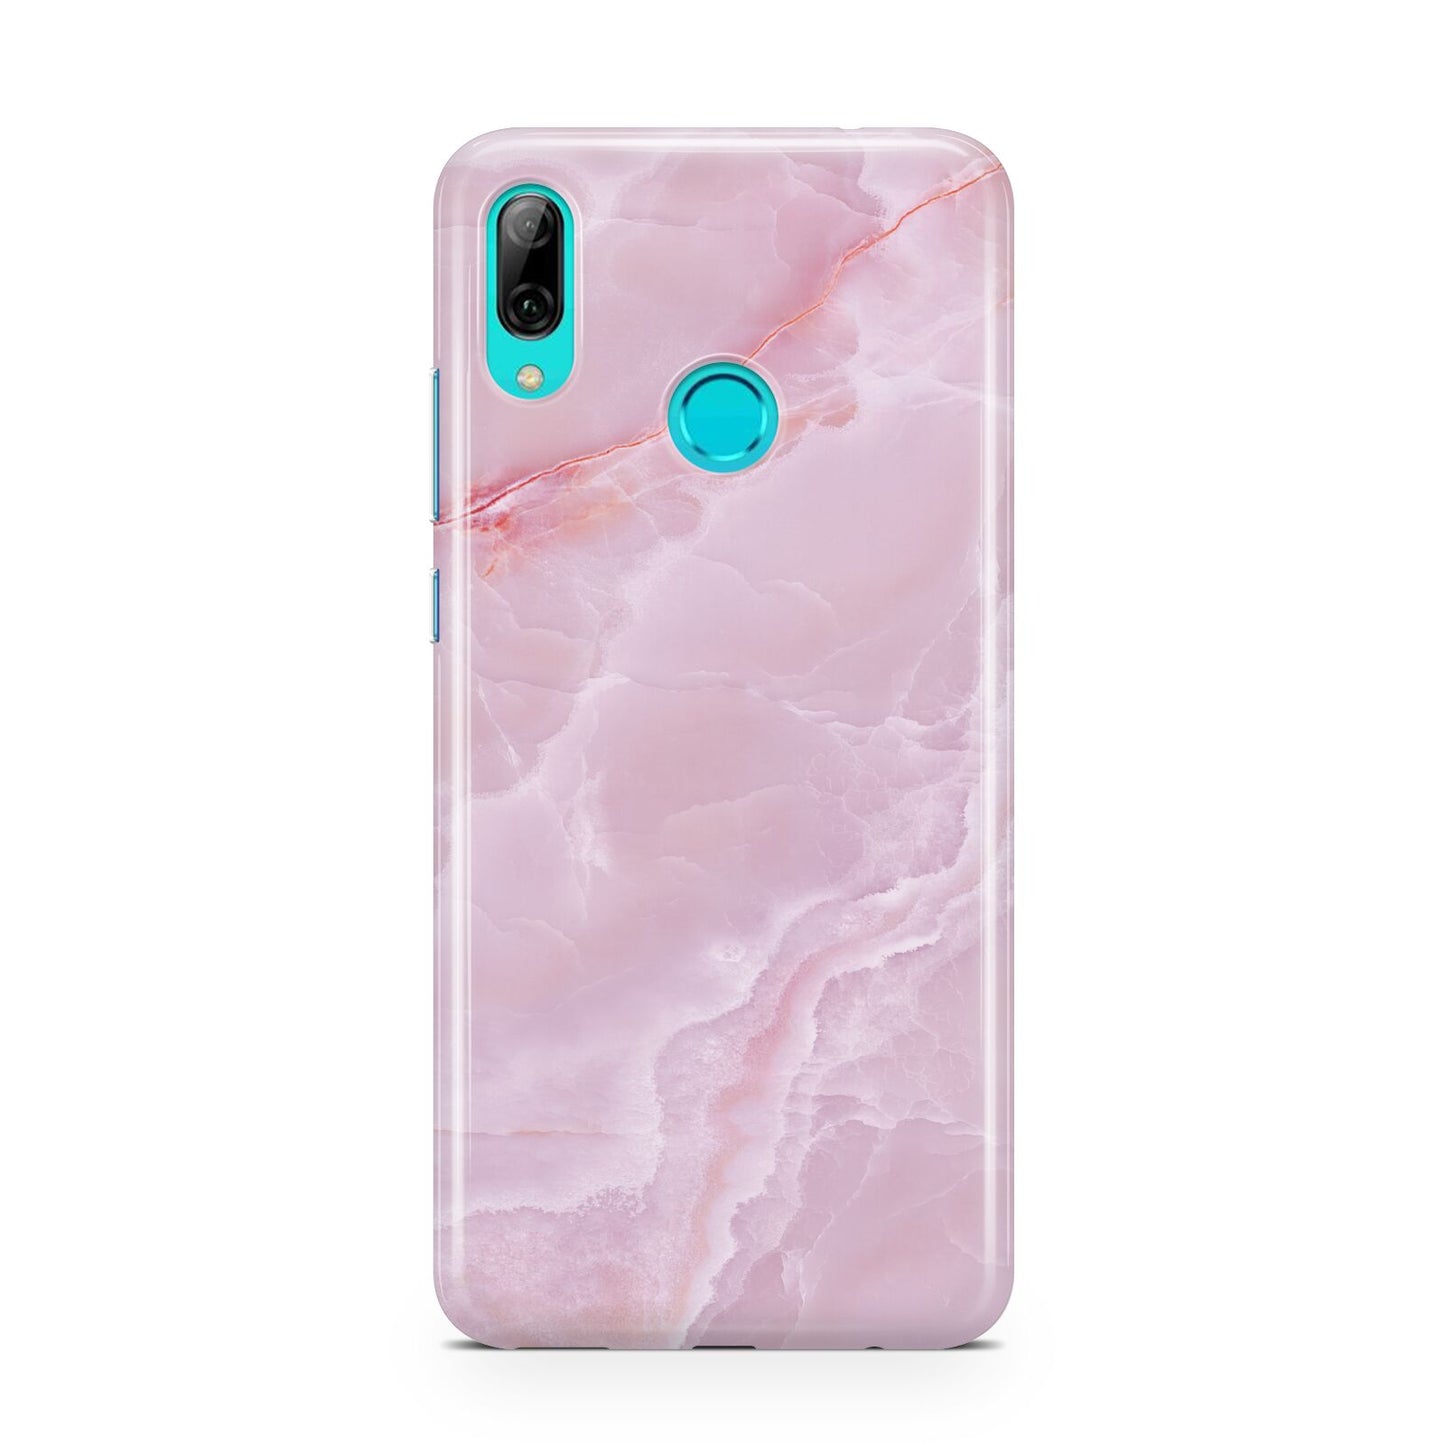 Dreamy Pink Marble Huawei P Smart 2019 Case